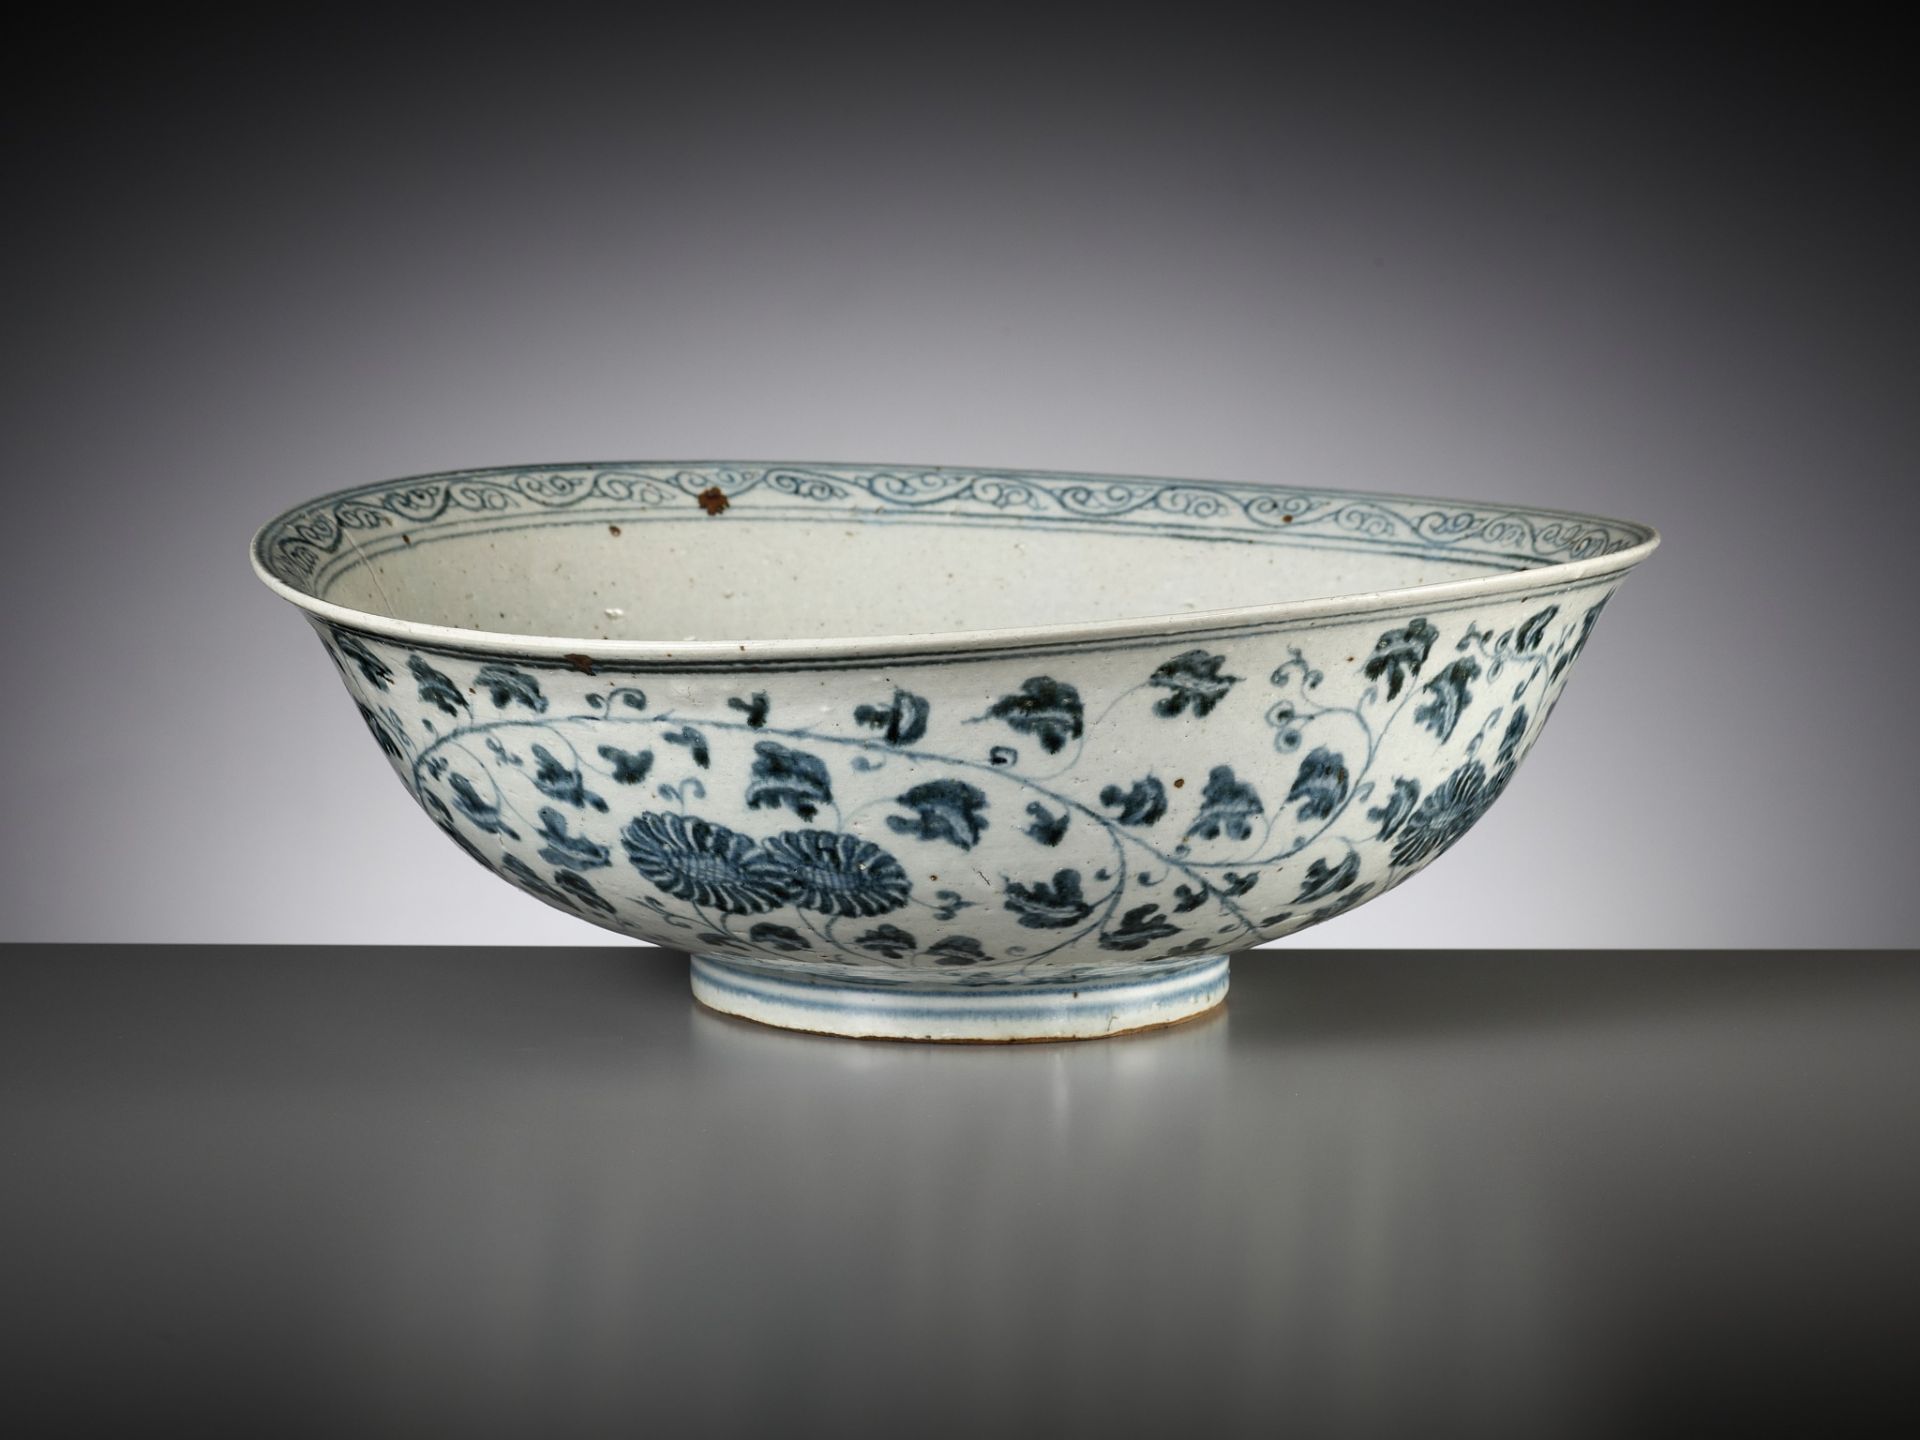 A LARGE ANNAMESE BLUE AND WHITE BOWL, VIETNAM, 14TH-15TH CENTURY - Image 11 of 12